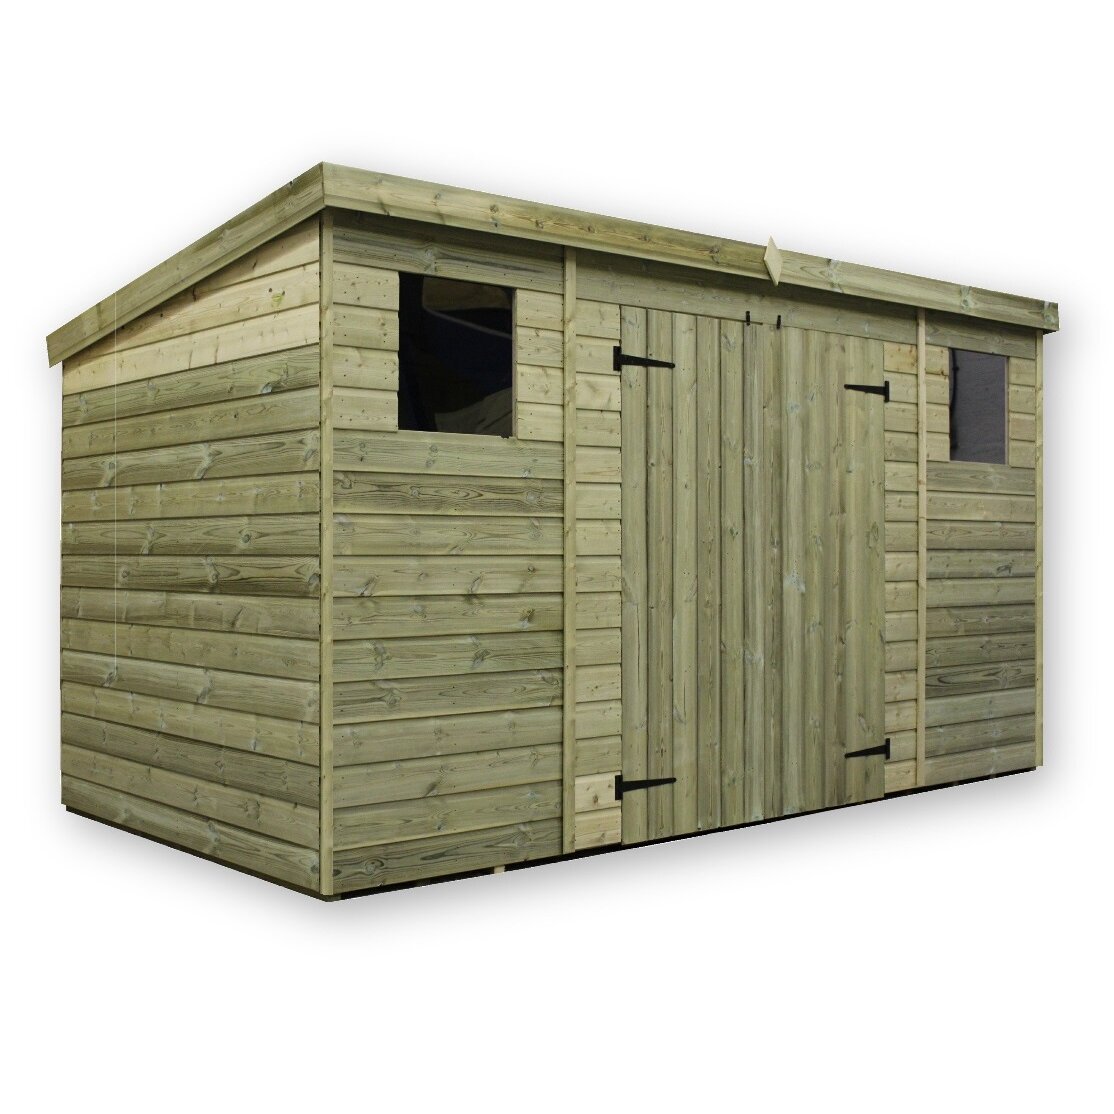 14 Ft. W x 5 Ft. D Wooden Lean-To Shed by Empire Sheds Ltd